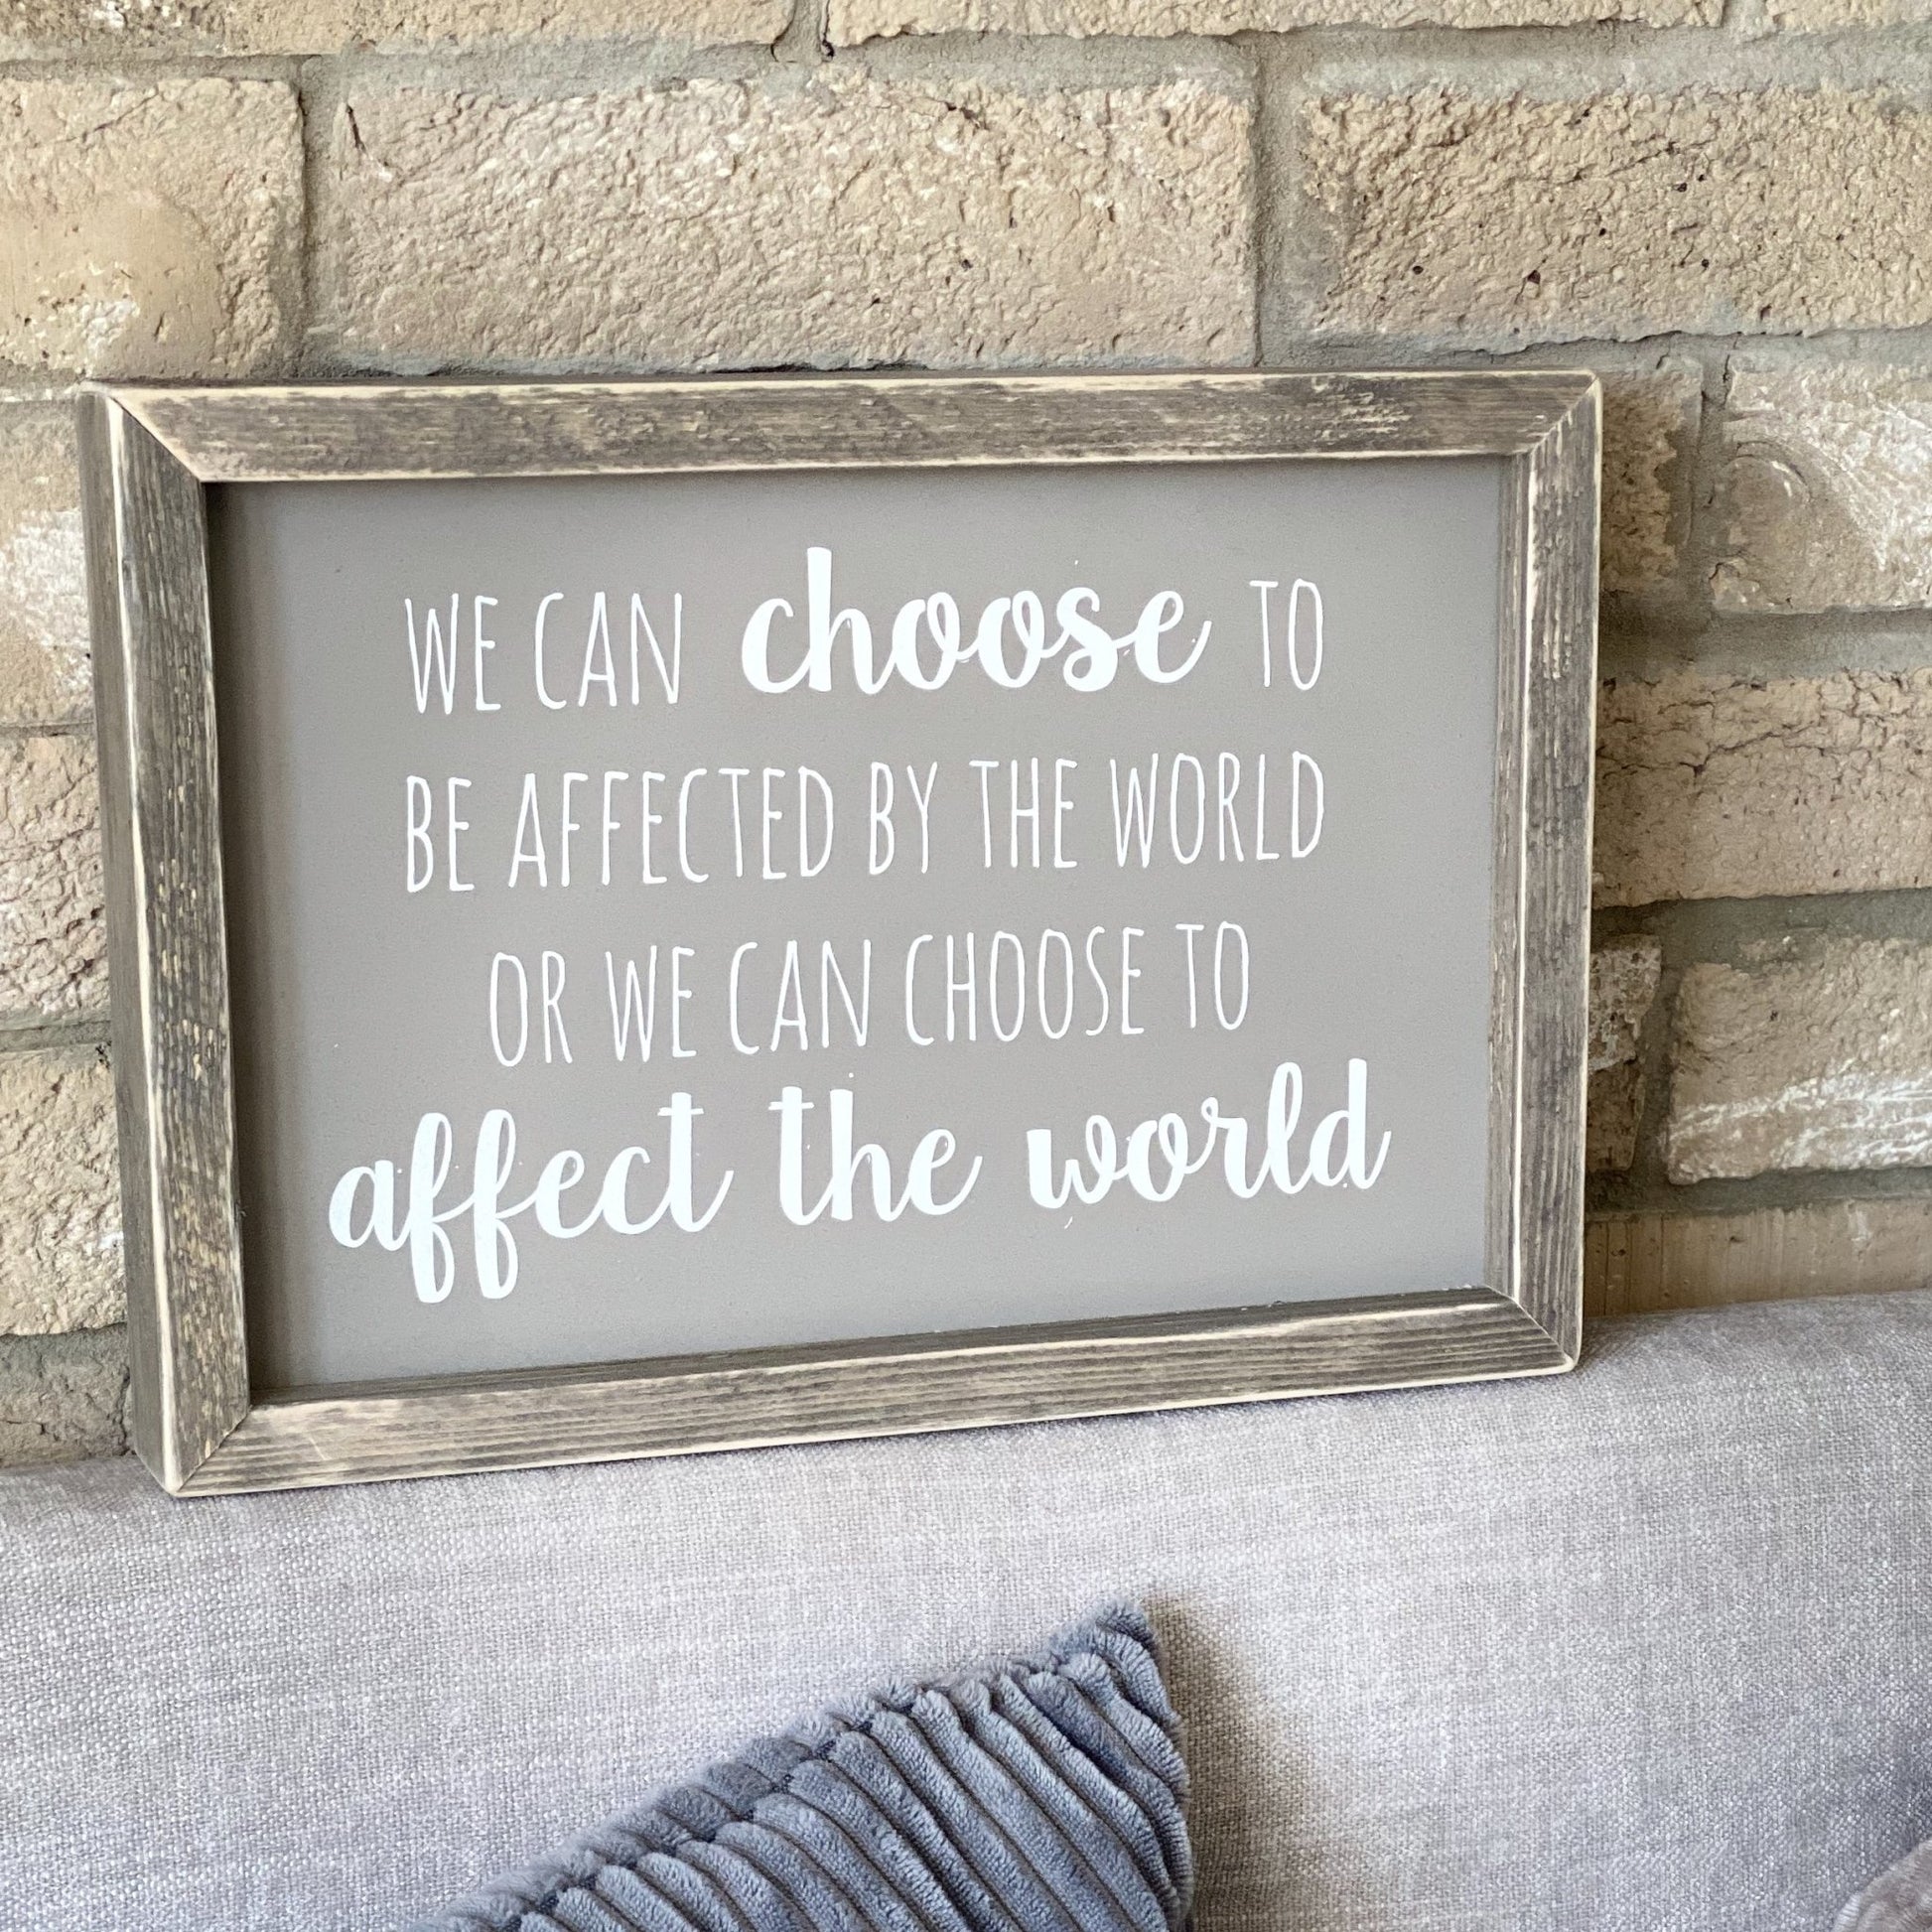 We Can Choose | Framed wood sign | #BrainTumourResearch - The Imperfect Wood Company - Framed Wood Sign